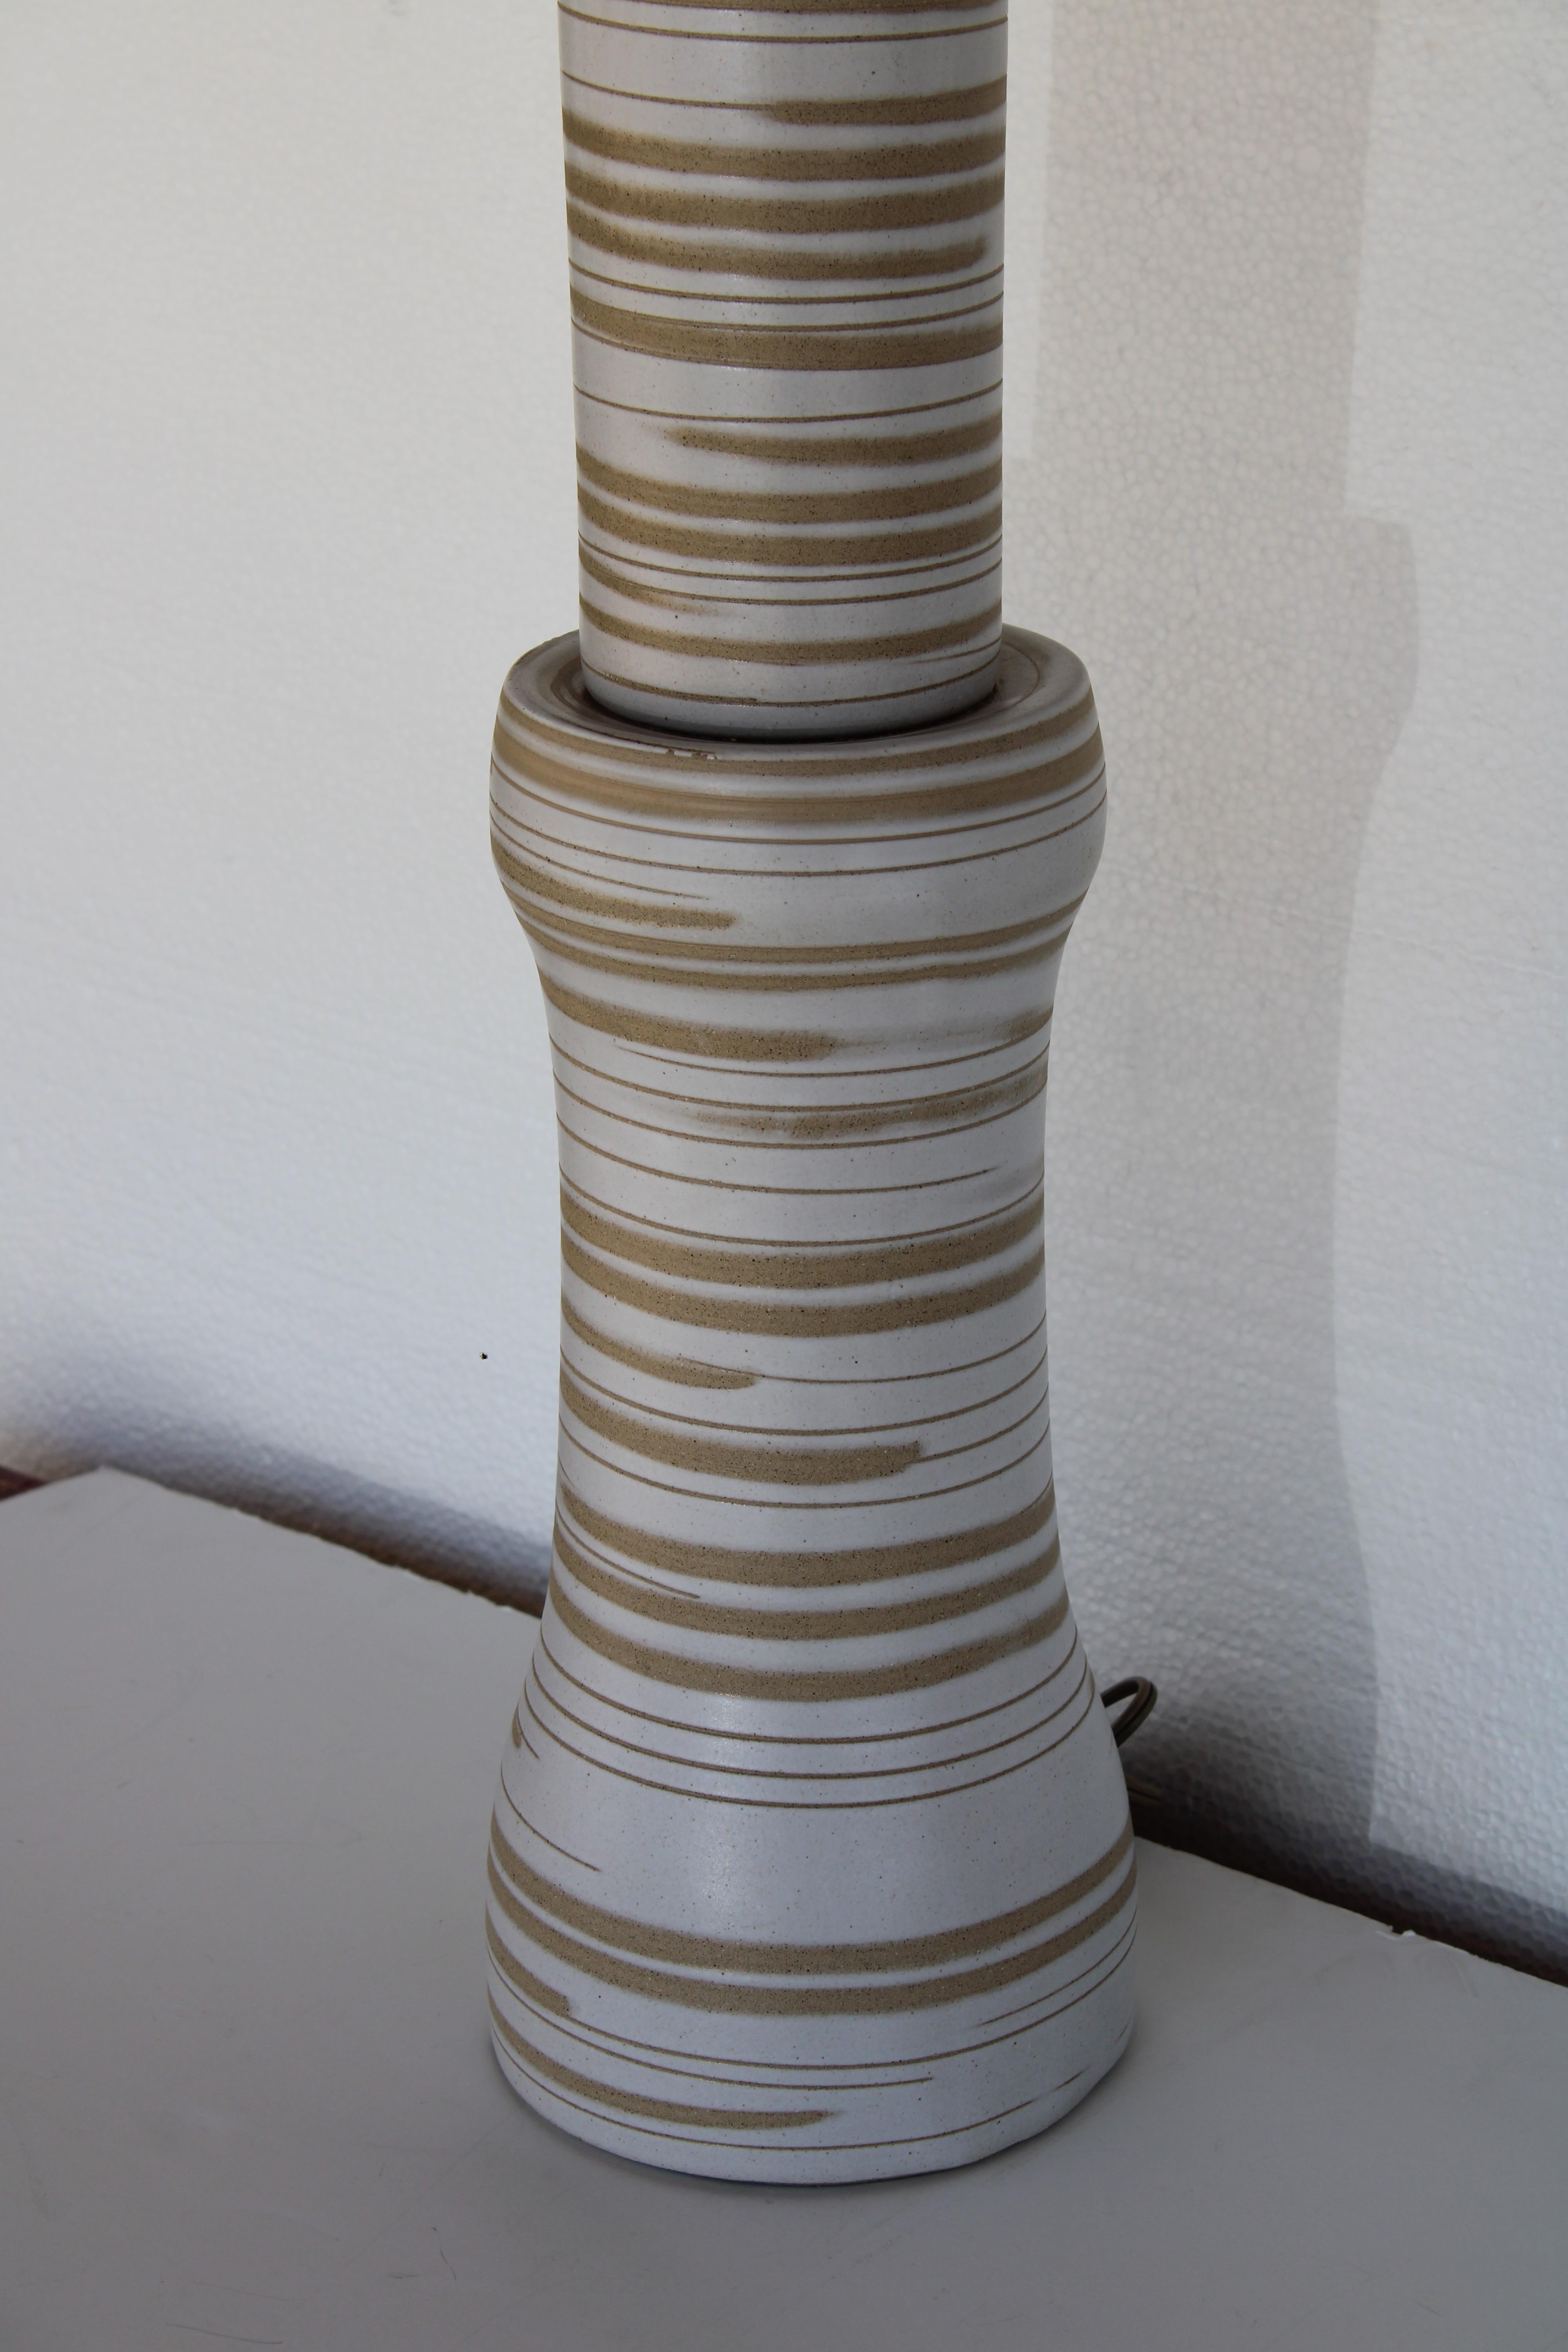 Ceramic Table Lamp by Martz In Good Condition For Sale In Palm Springs, CA